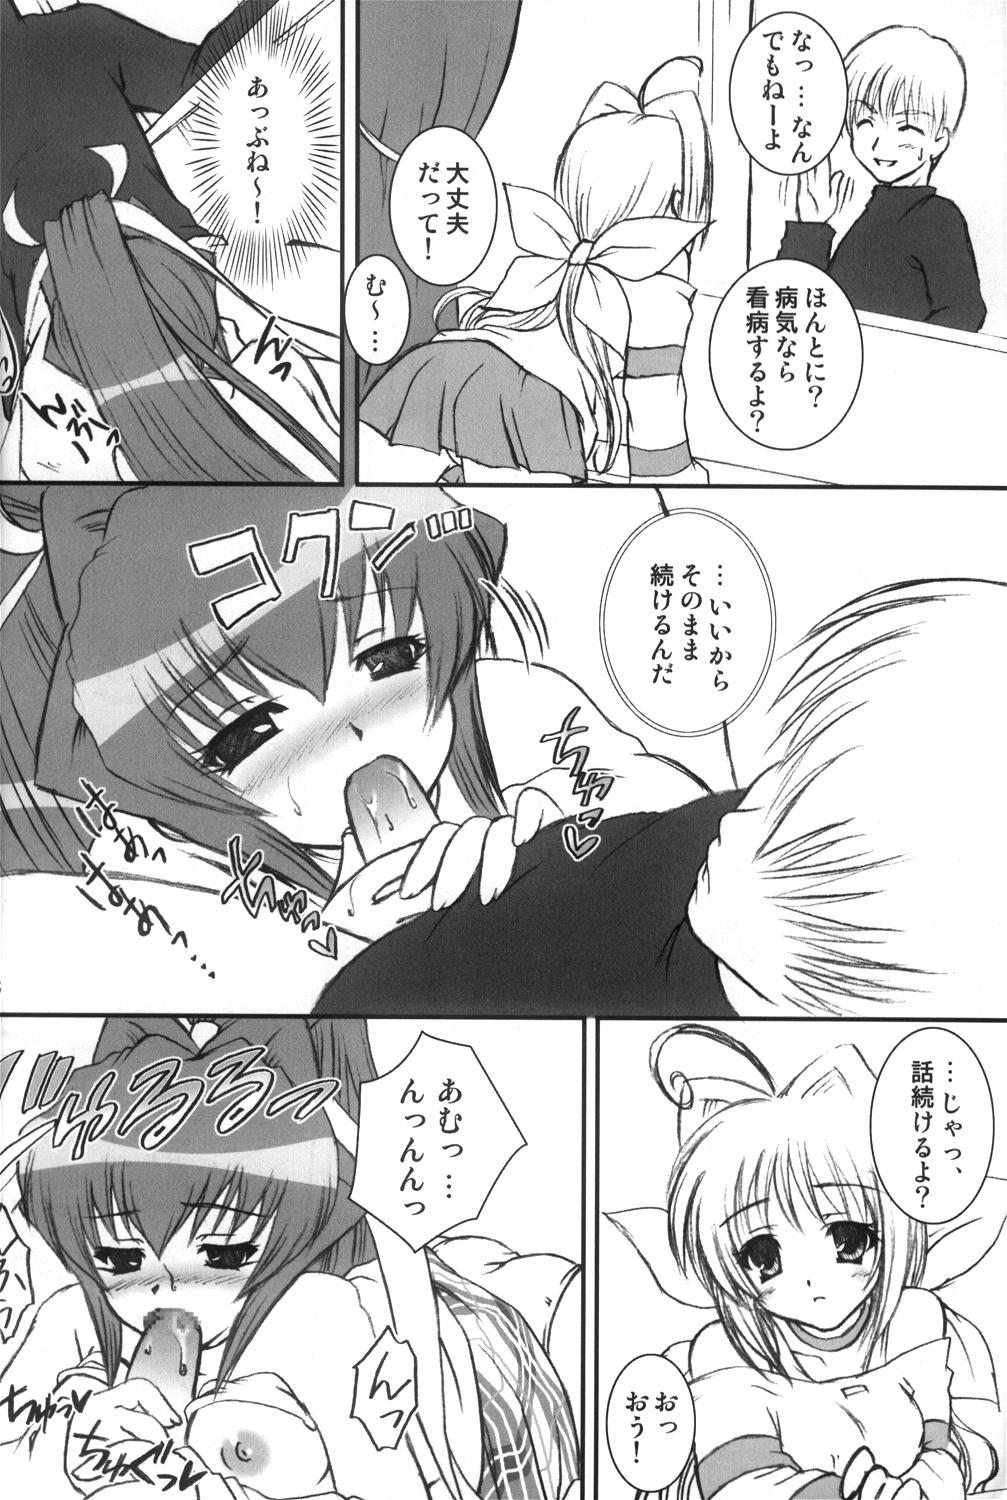 Lima I have fallen in love with you... - Muv-luv Big Ass - Page 7